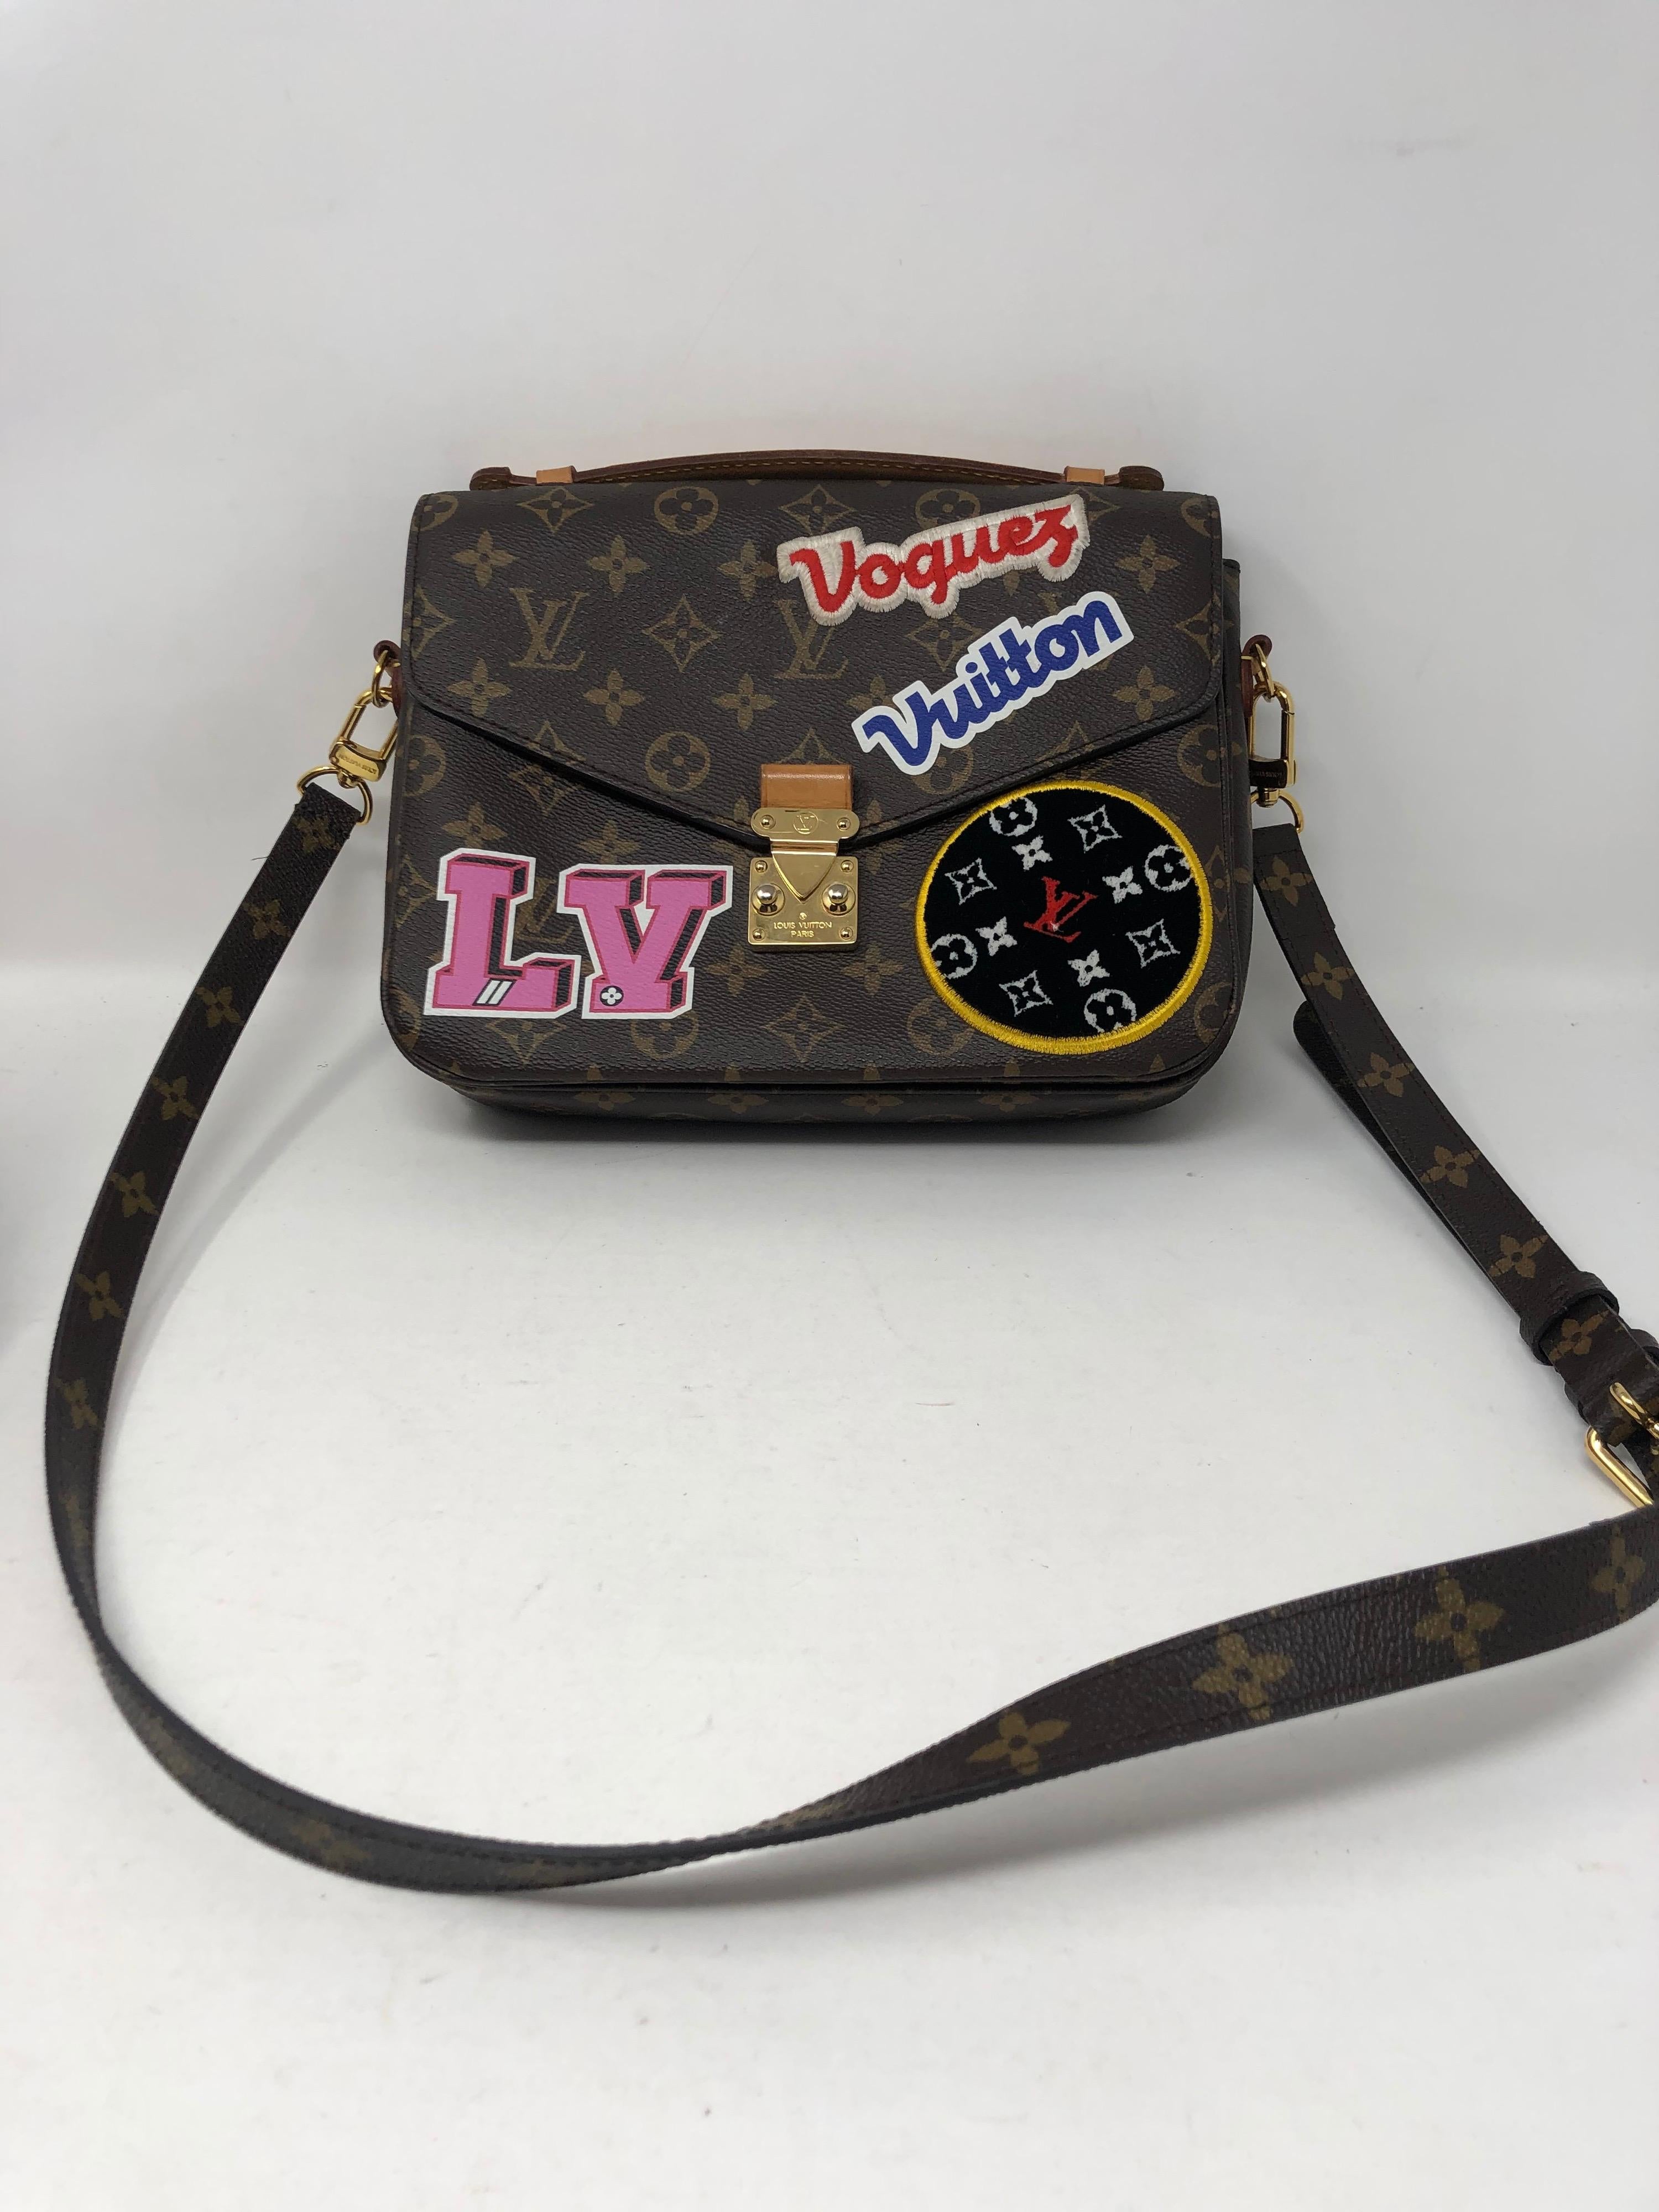 Louis Vuitton Limited Edition Patches Pochette Metis Bag. Good condition. Can be worn 2 ways. Crossbody and top handle bag. Unique collector's piece. Date code inside. Guaranteed authentic. 